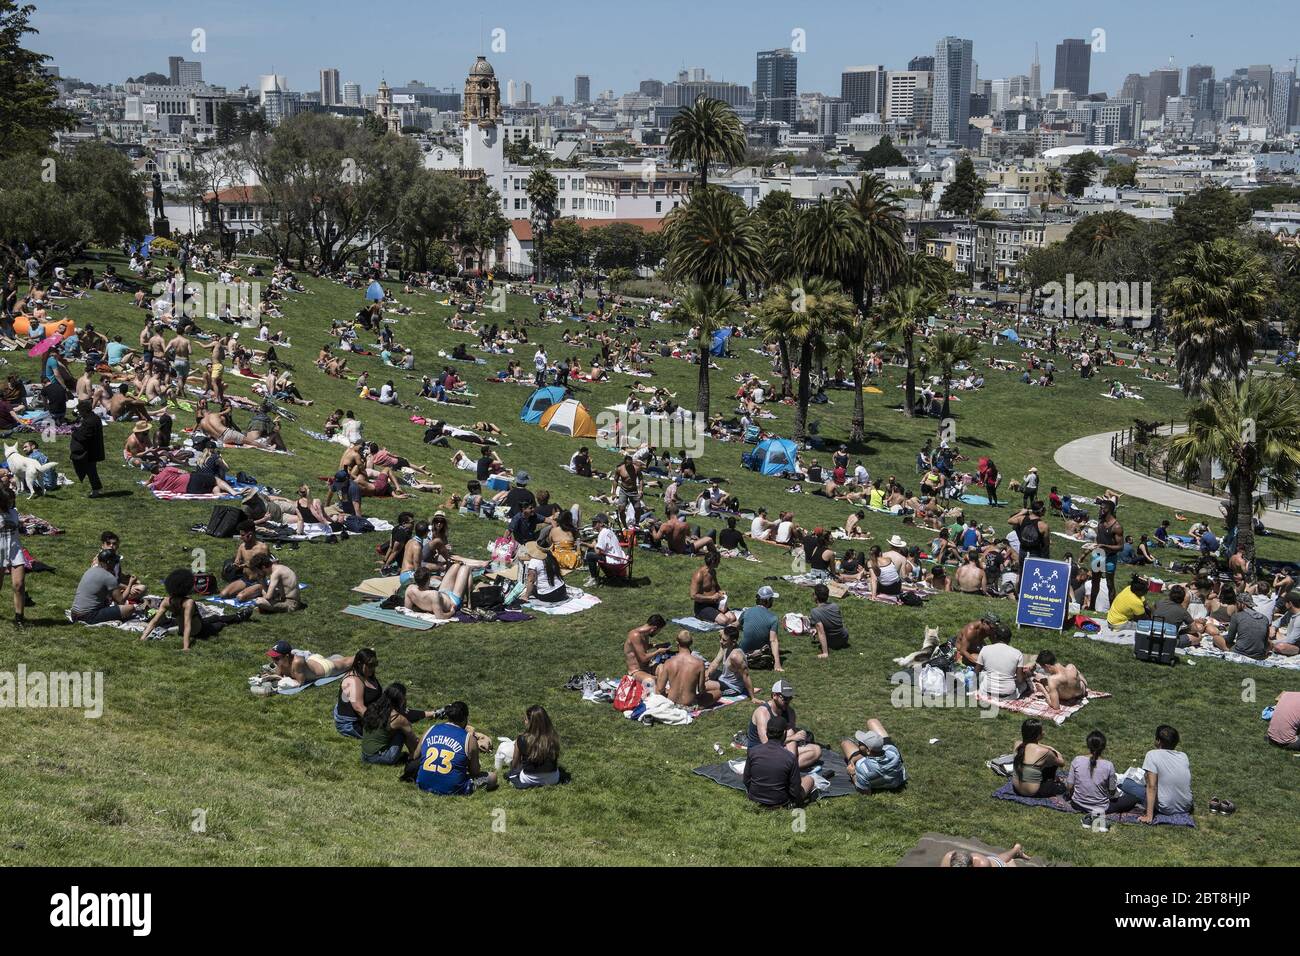 San Francisco, United States. 24th May, 2020. Groups cover the grass in Delores Park in San Francisco on Saturday, May 23, 2020. Warm weather and a holiday weekend brought out thousands to practice their own brands of social distancing. Photo by Terry Schmitt/U10 Credit: UPI/Alamy Live News Stock Photo